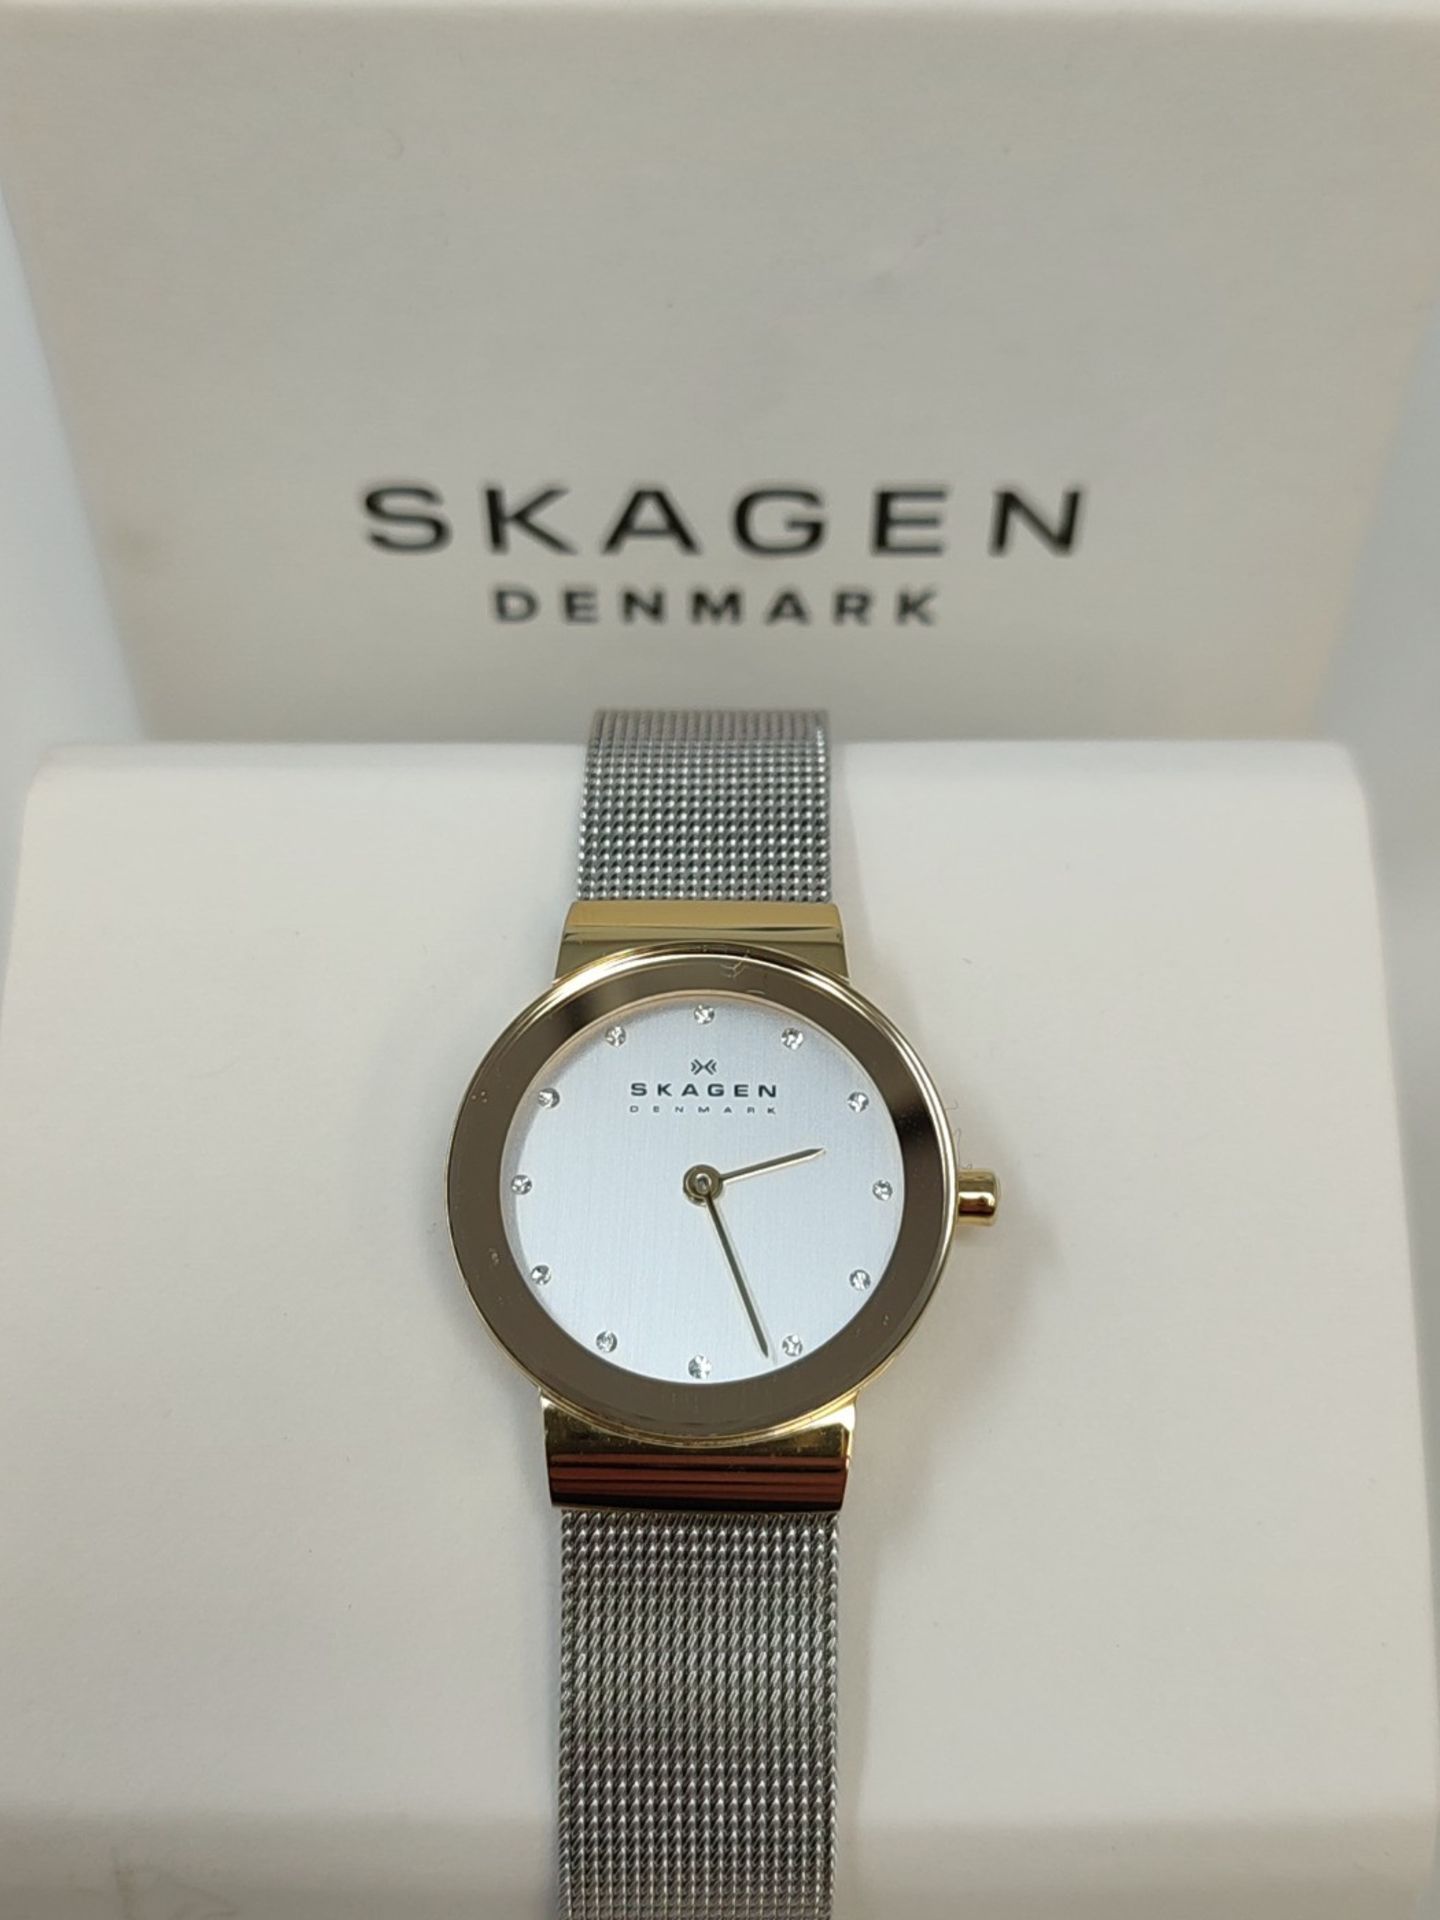 RRP £53.00 Skagen women's watch Freja Lille, two-hand movement, 26mm gold stainless steel case wi - Image 2 of 3